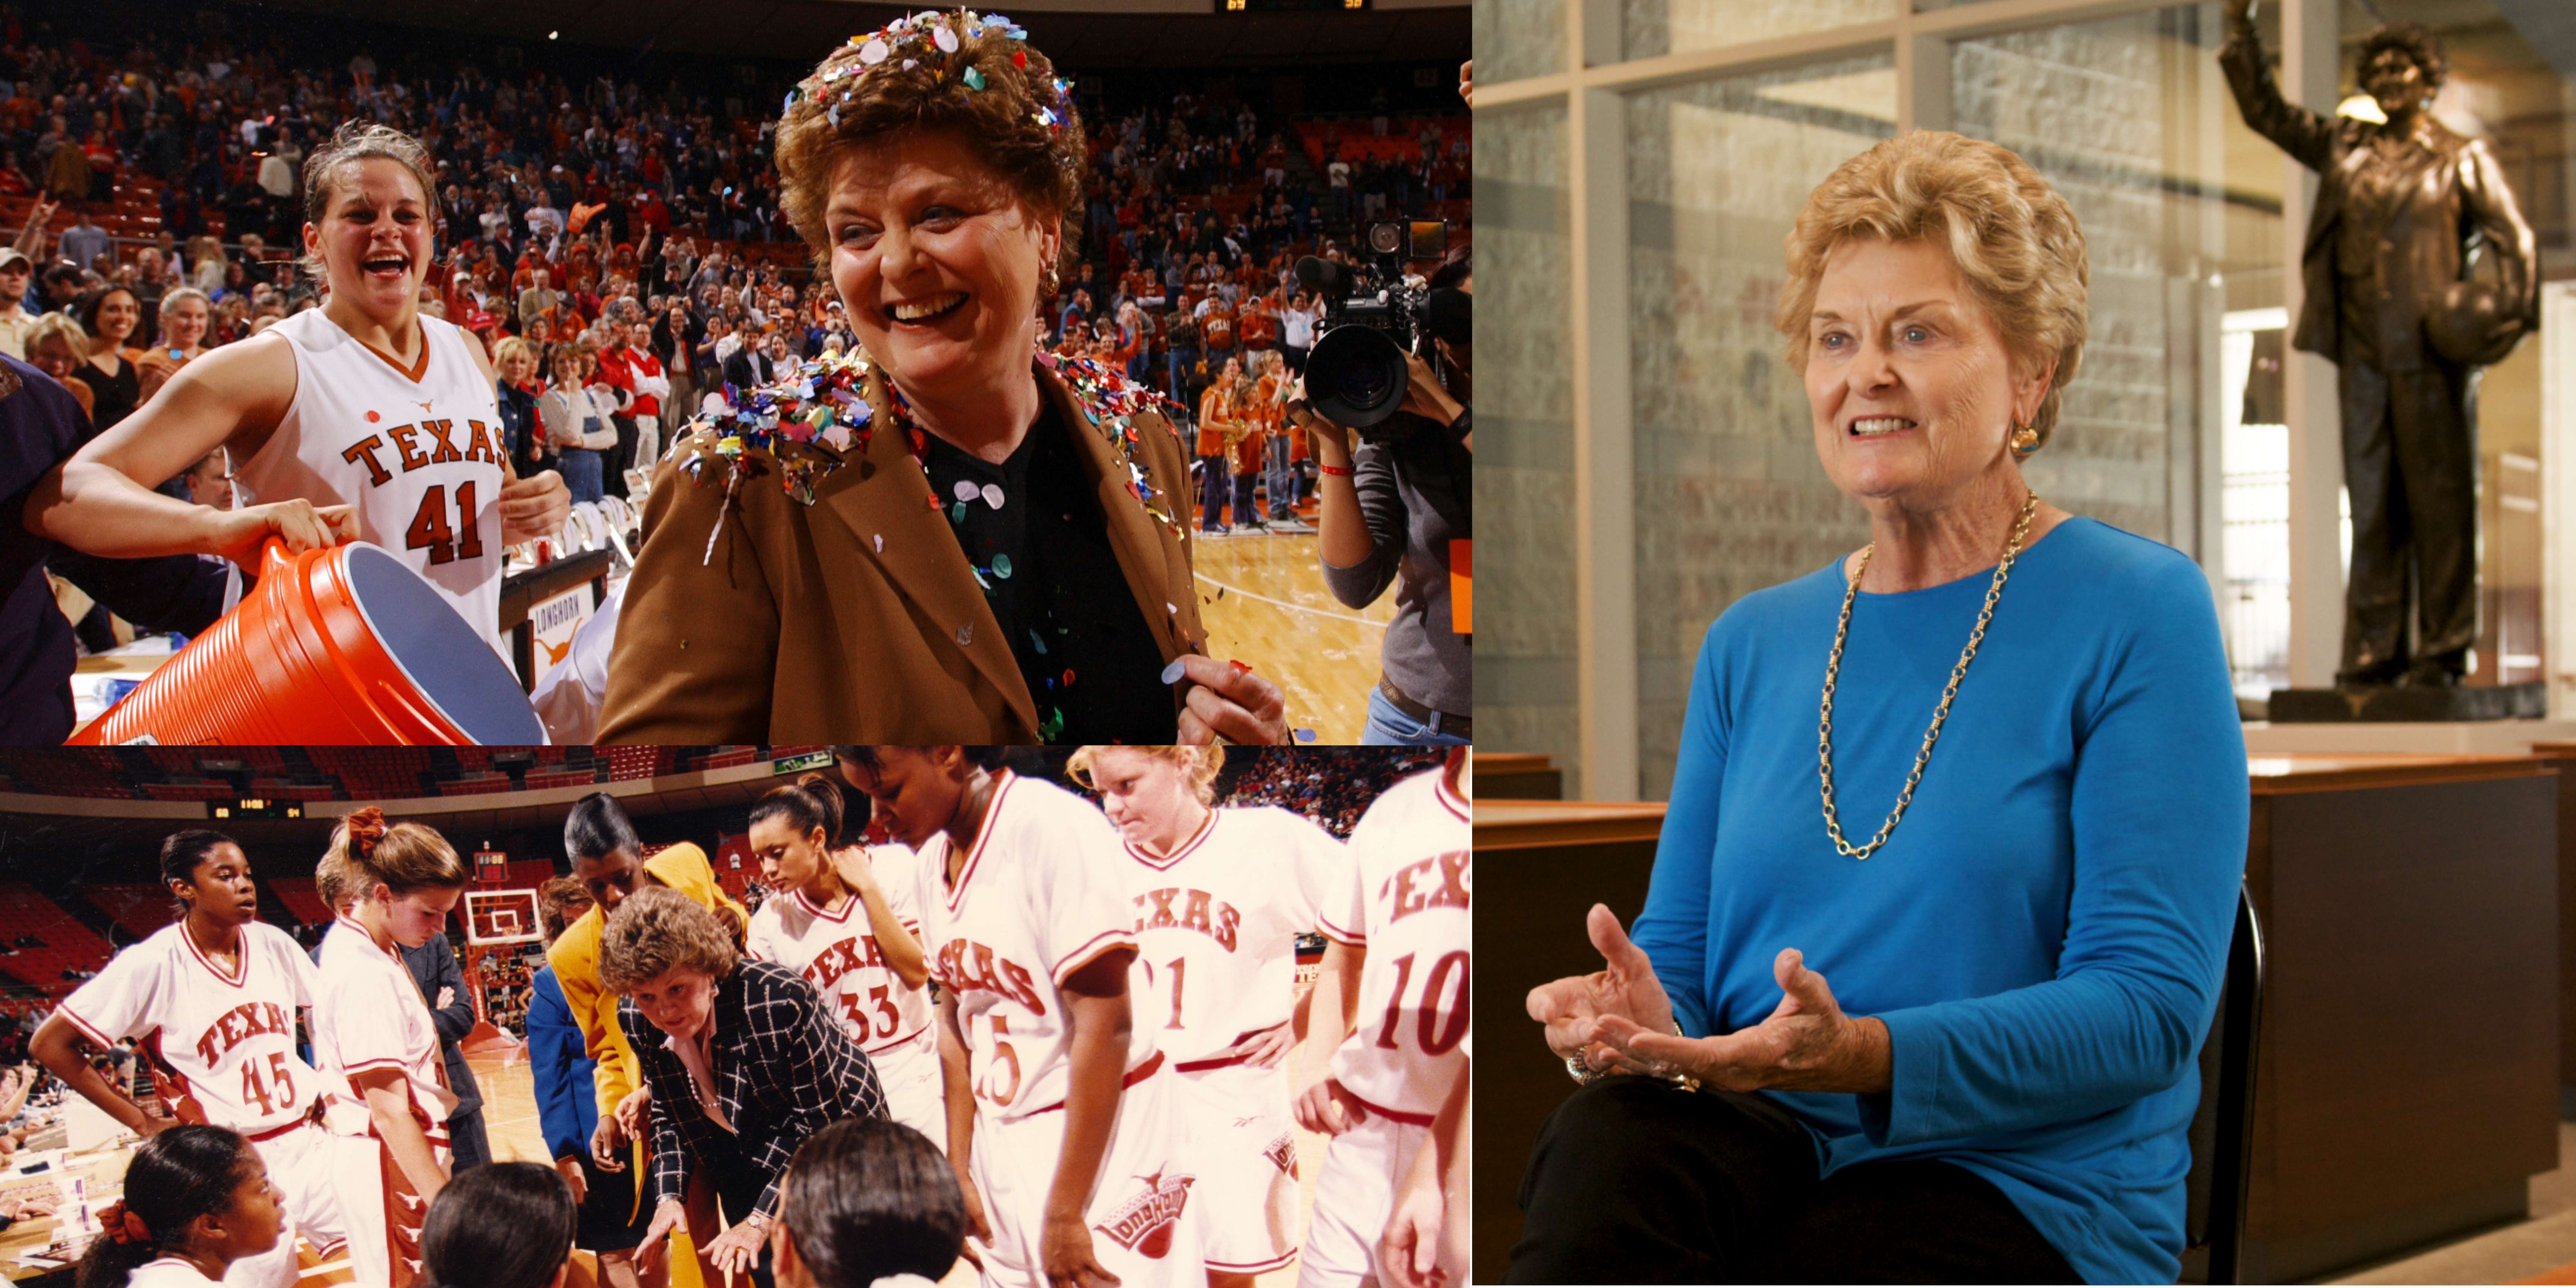 Collage with pictures of Jody Conradt coaching at the University of Texas on the left and a picture of her sitting in front of her statue for an interview on the right.